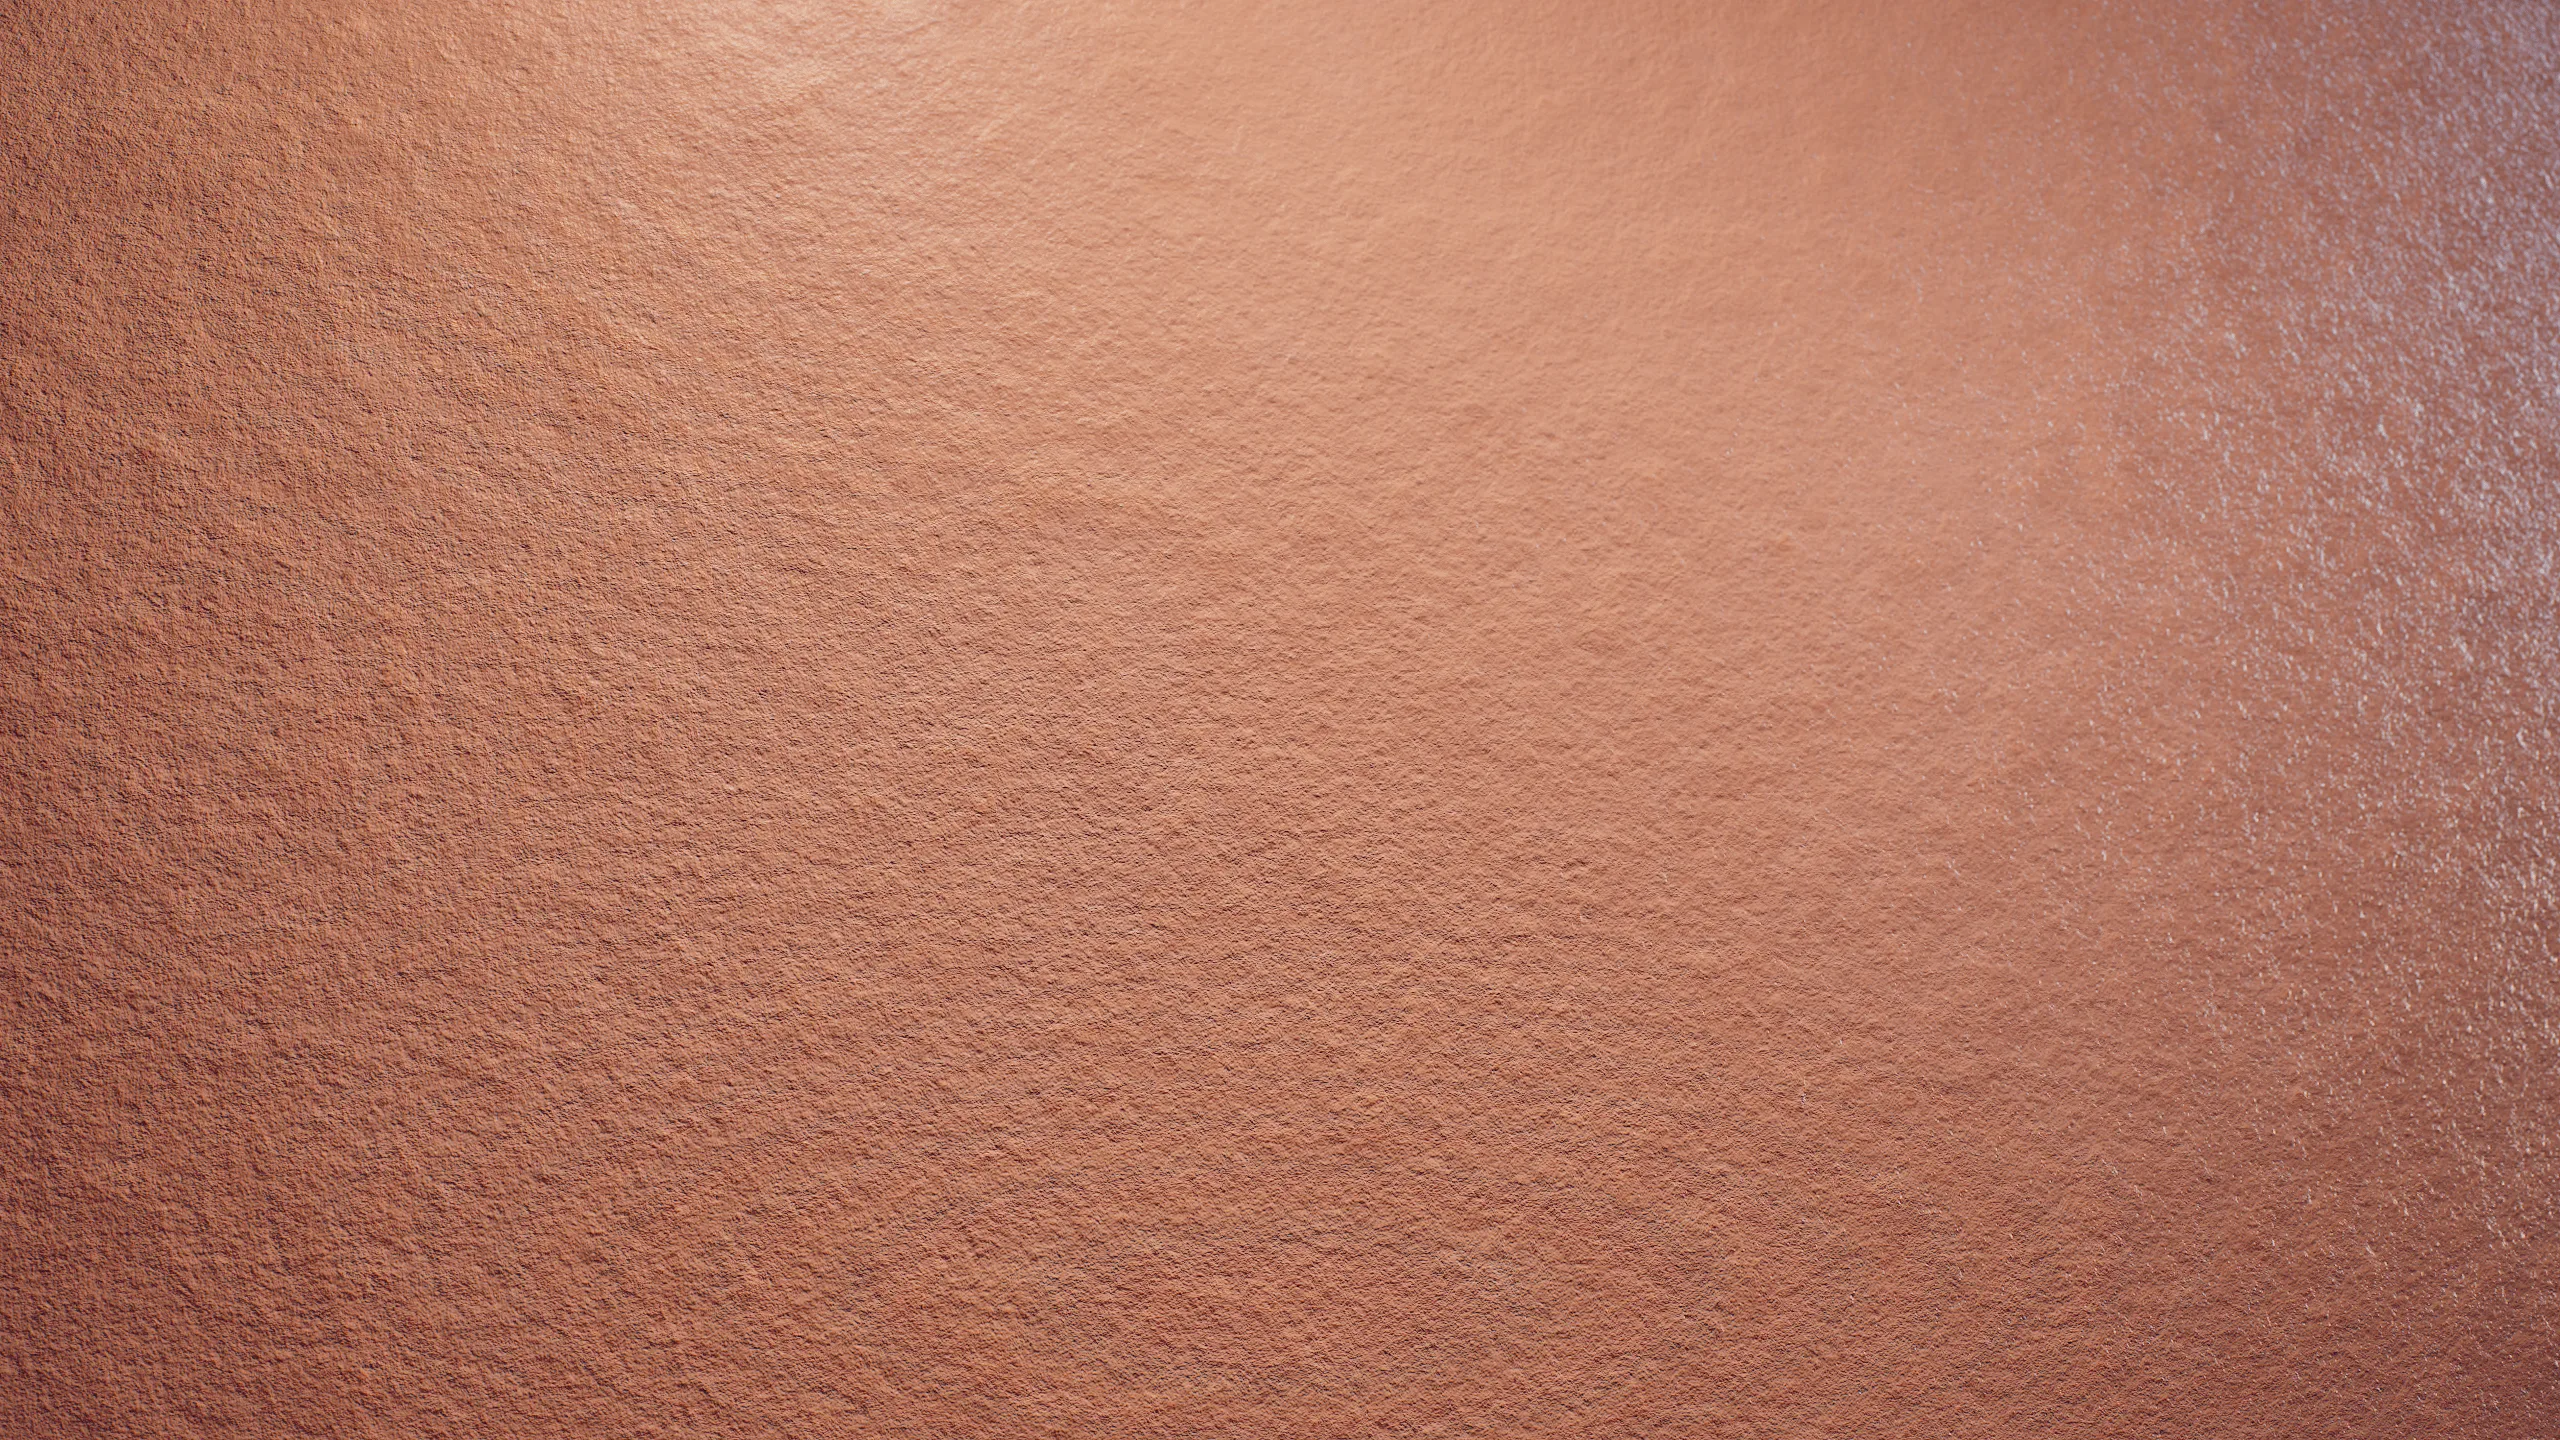 Texture Stylized Skin Material